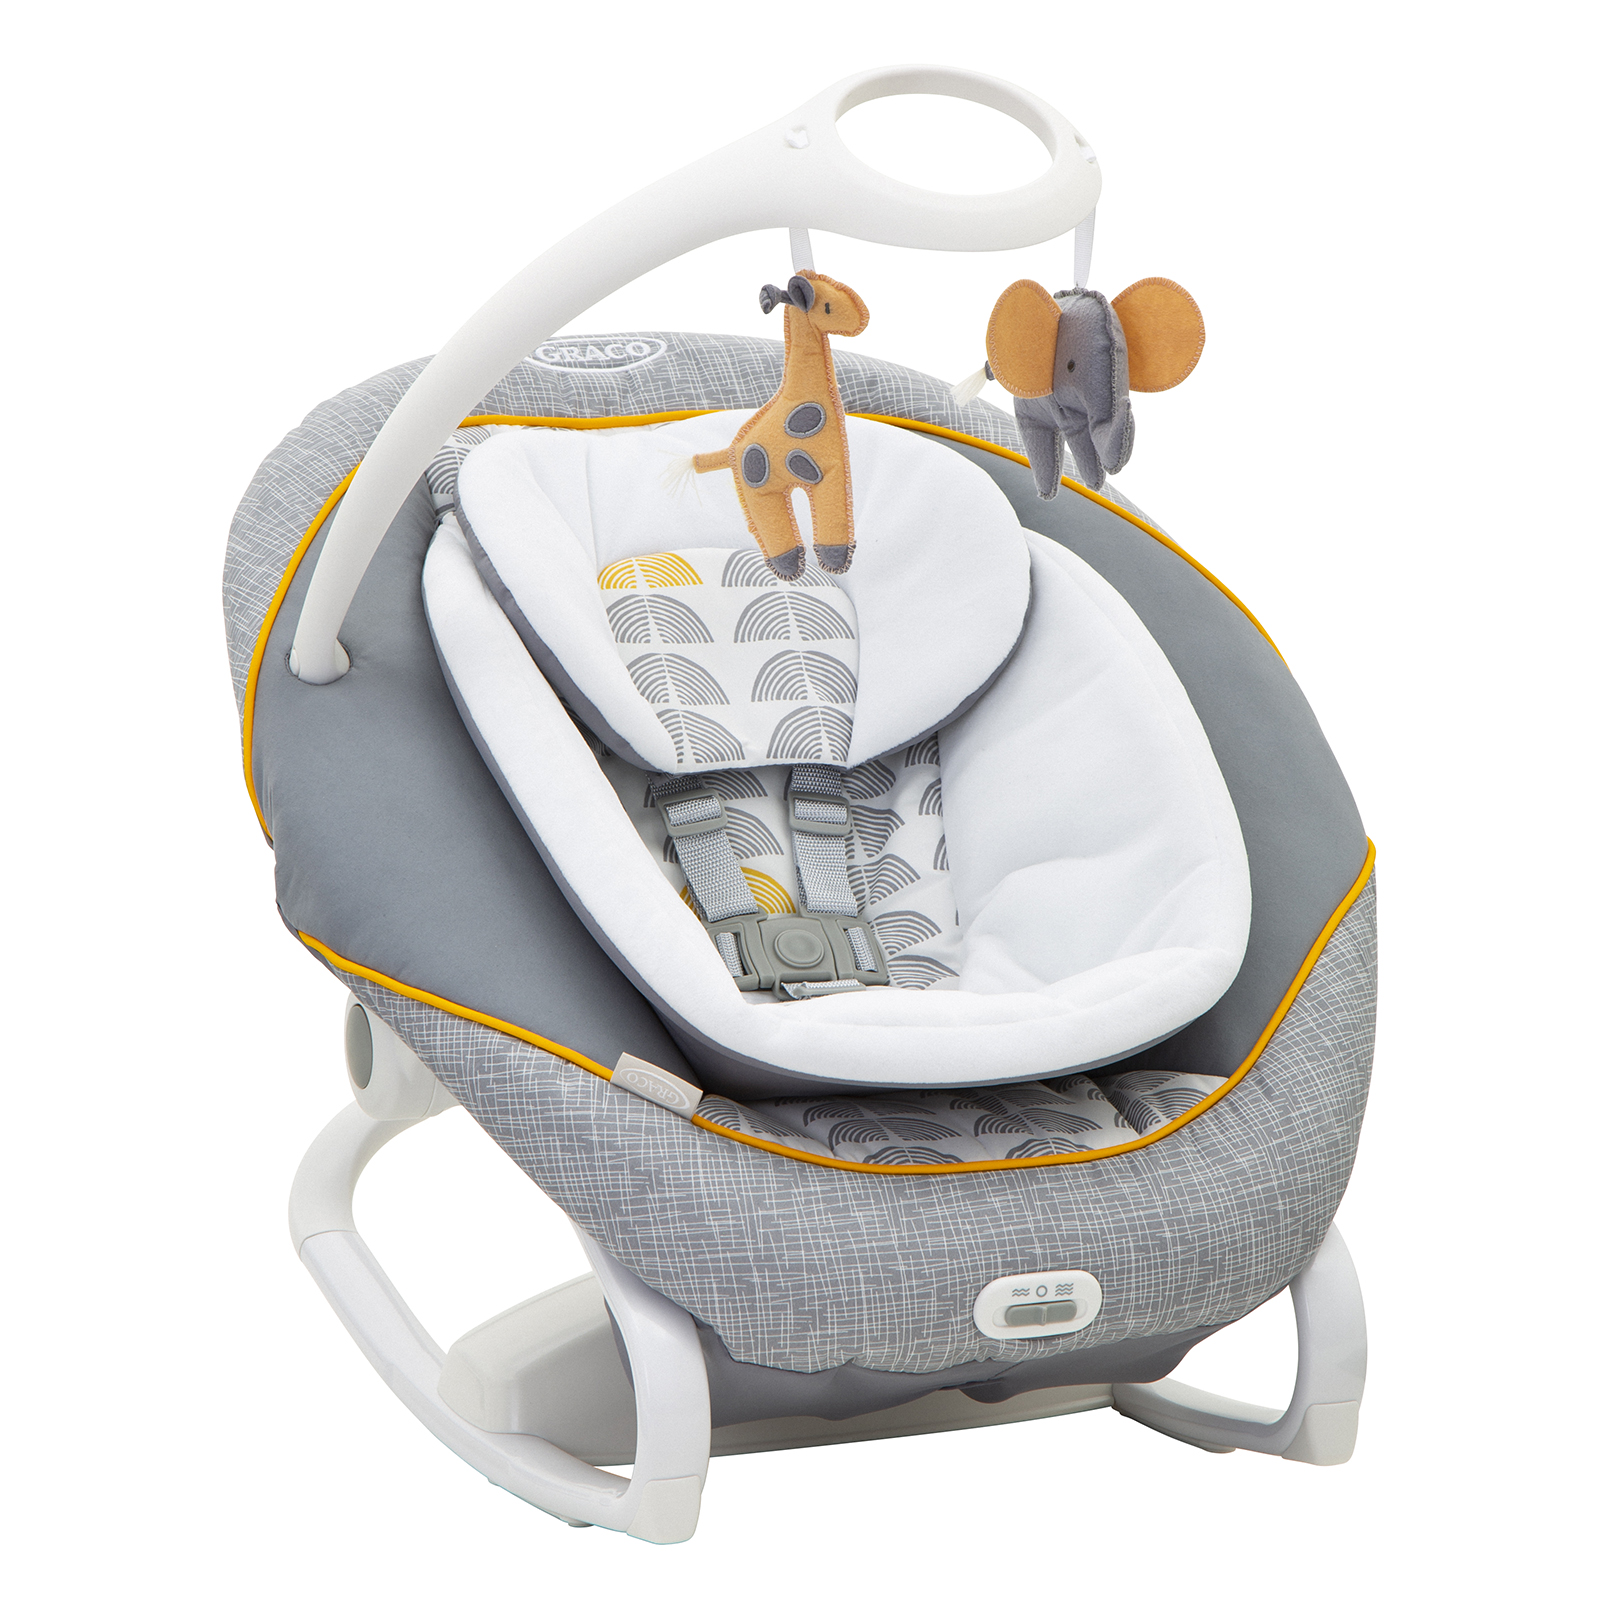 / Sounds Grey Horizon Graco 2in1 Soother Rocker Buy Online4baby & Swing with at Musical Ways | – All Vibration